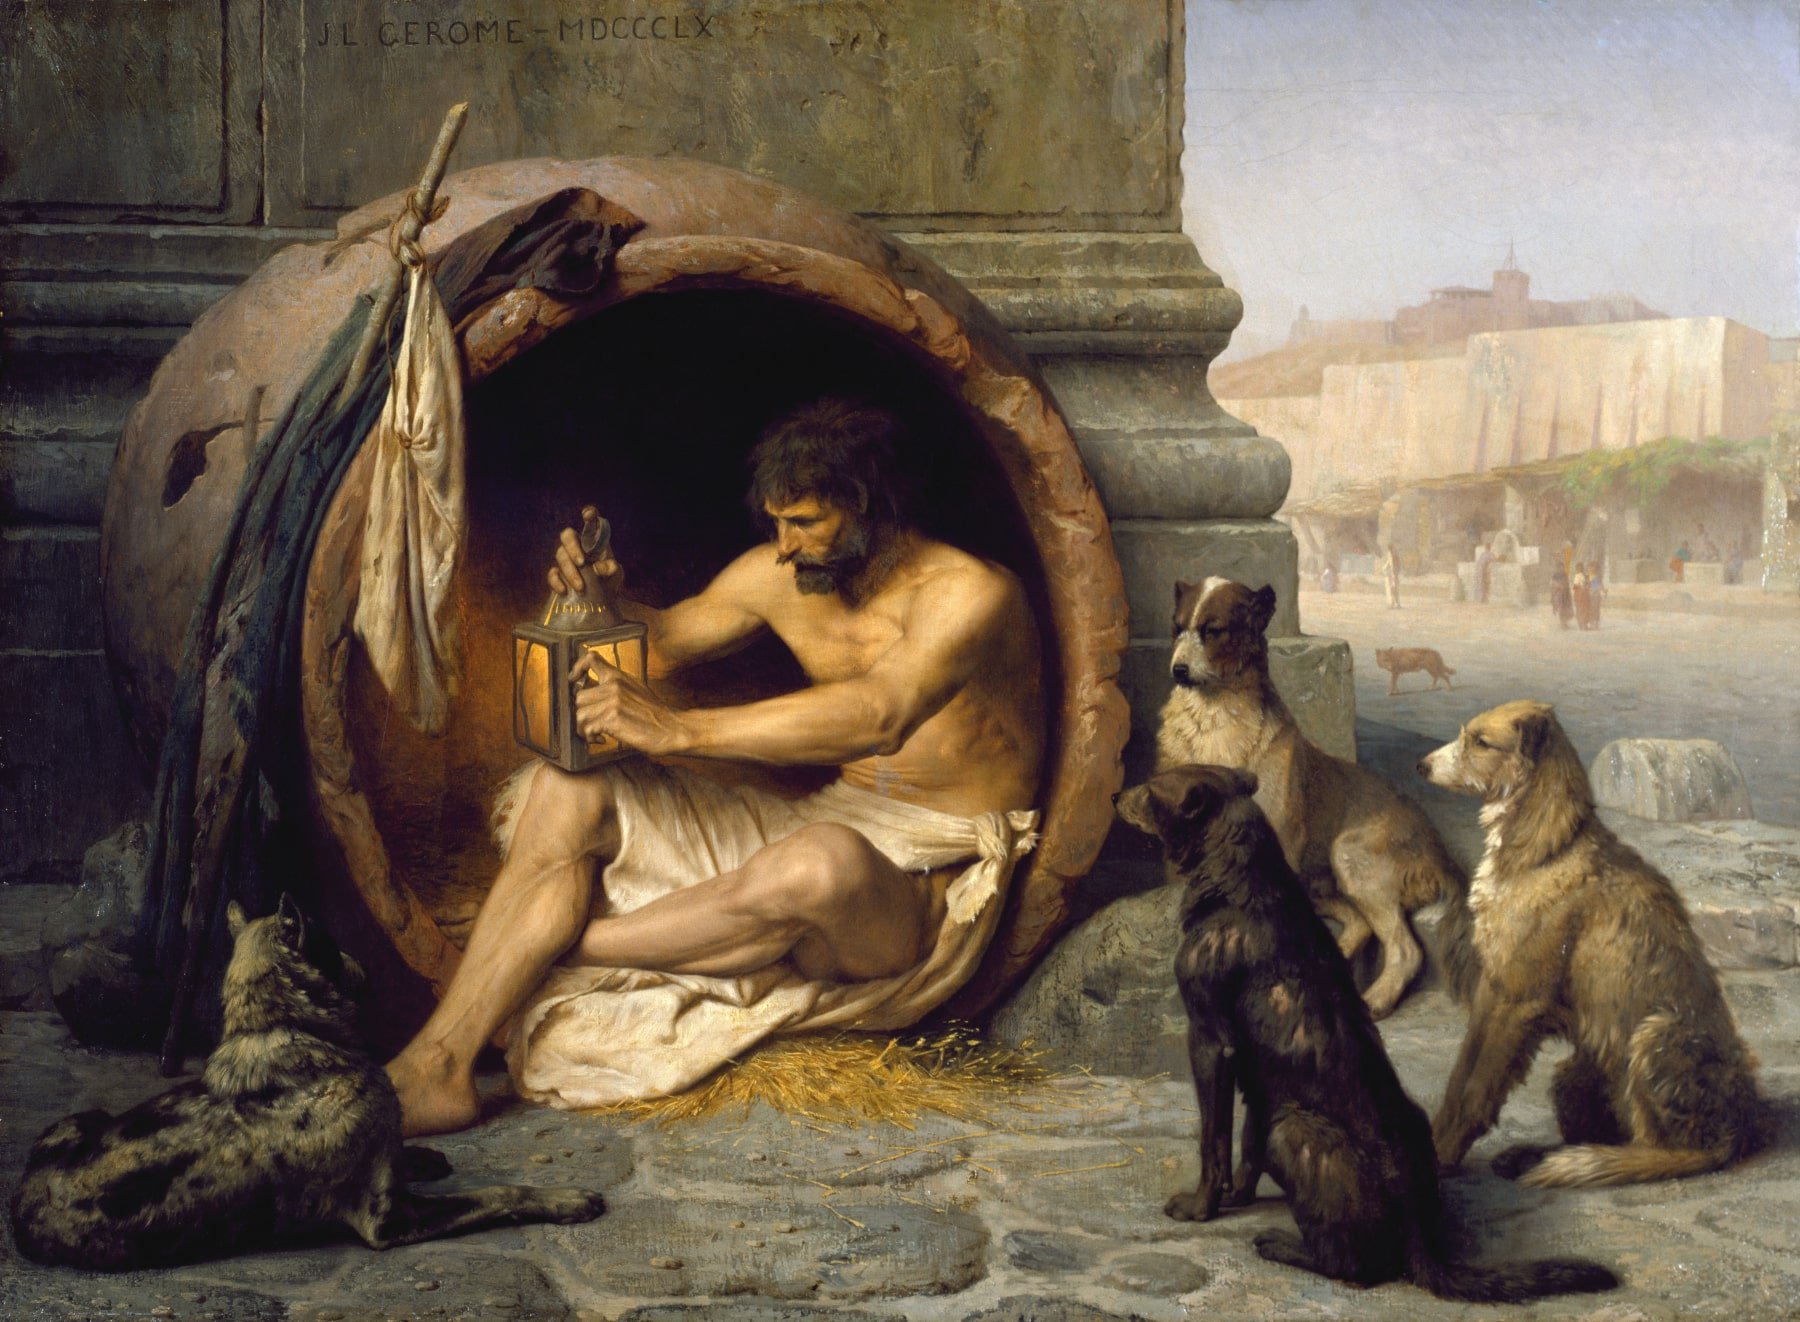 Comparing and Contrasting the Approaches of the Cynics, Epicureans, and Stoics to the Common Social and Philosophical Issues of the Hellenistic Age